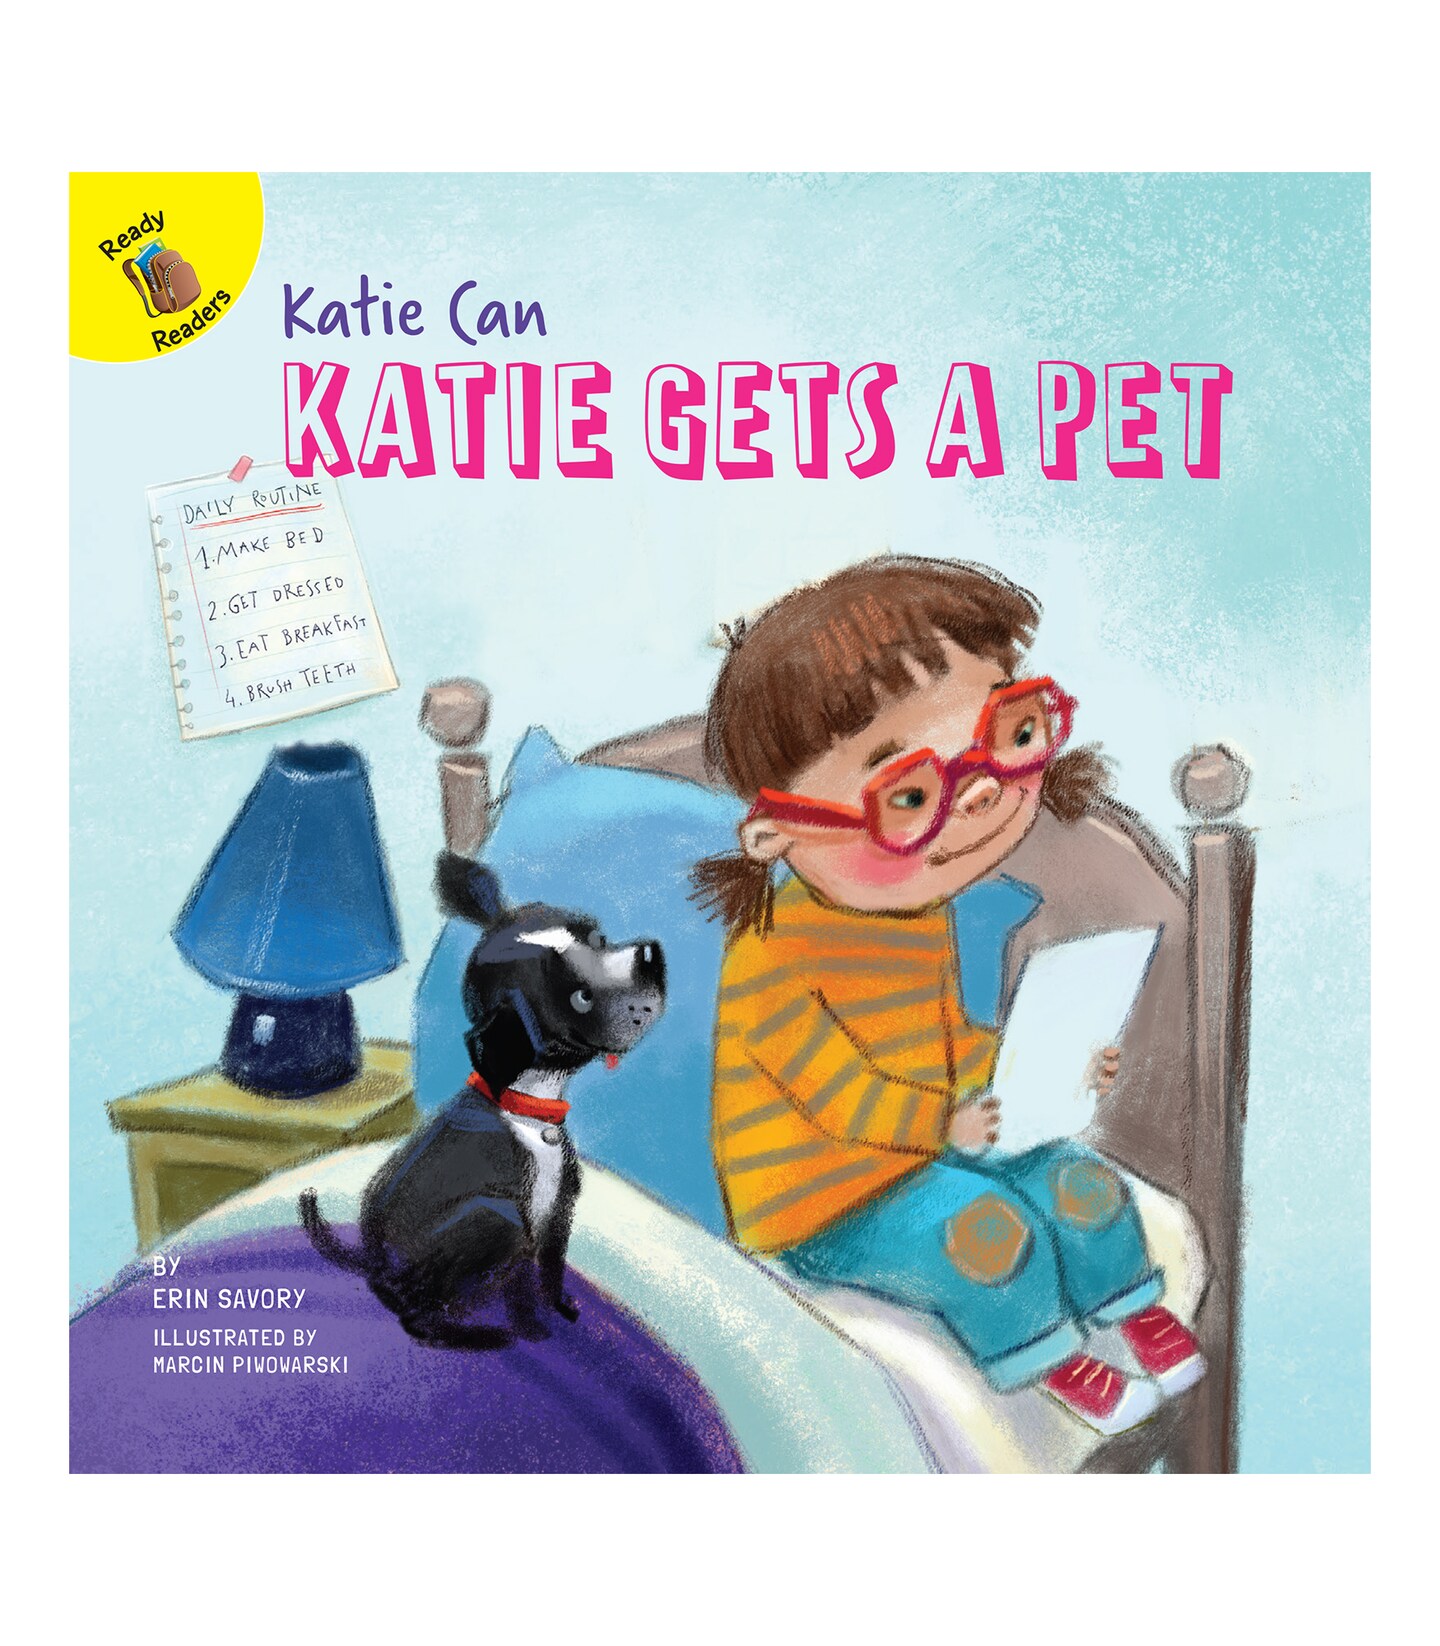 Rourke Educational Media Katie Gets a Pet&#x26;mdash;A Story About Different Abilities and Adopting a Pet, Grades PreK-2 Leveled Readers, Katie Can Series (24 pgs)  Reader